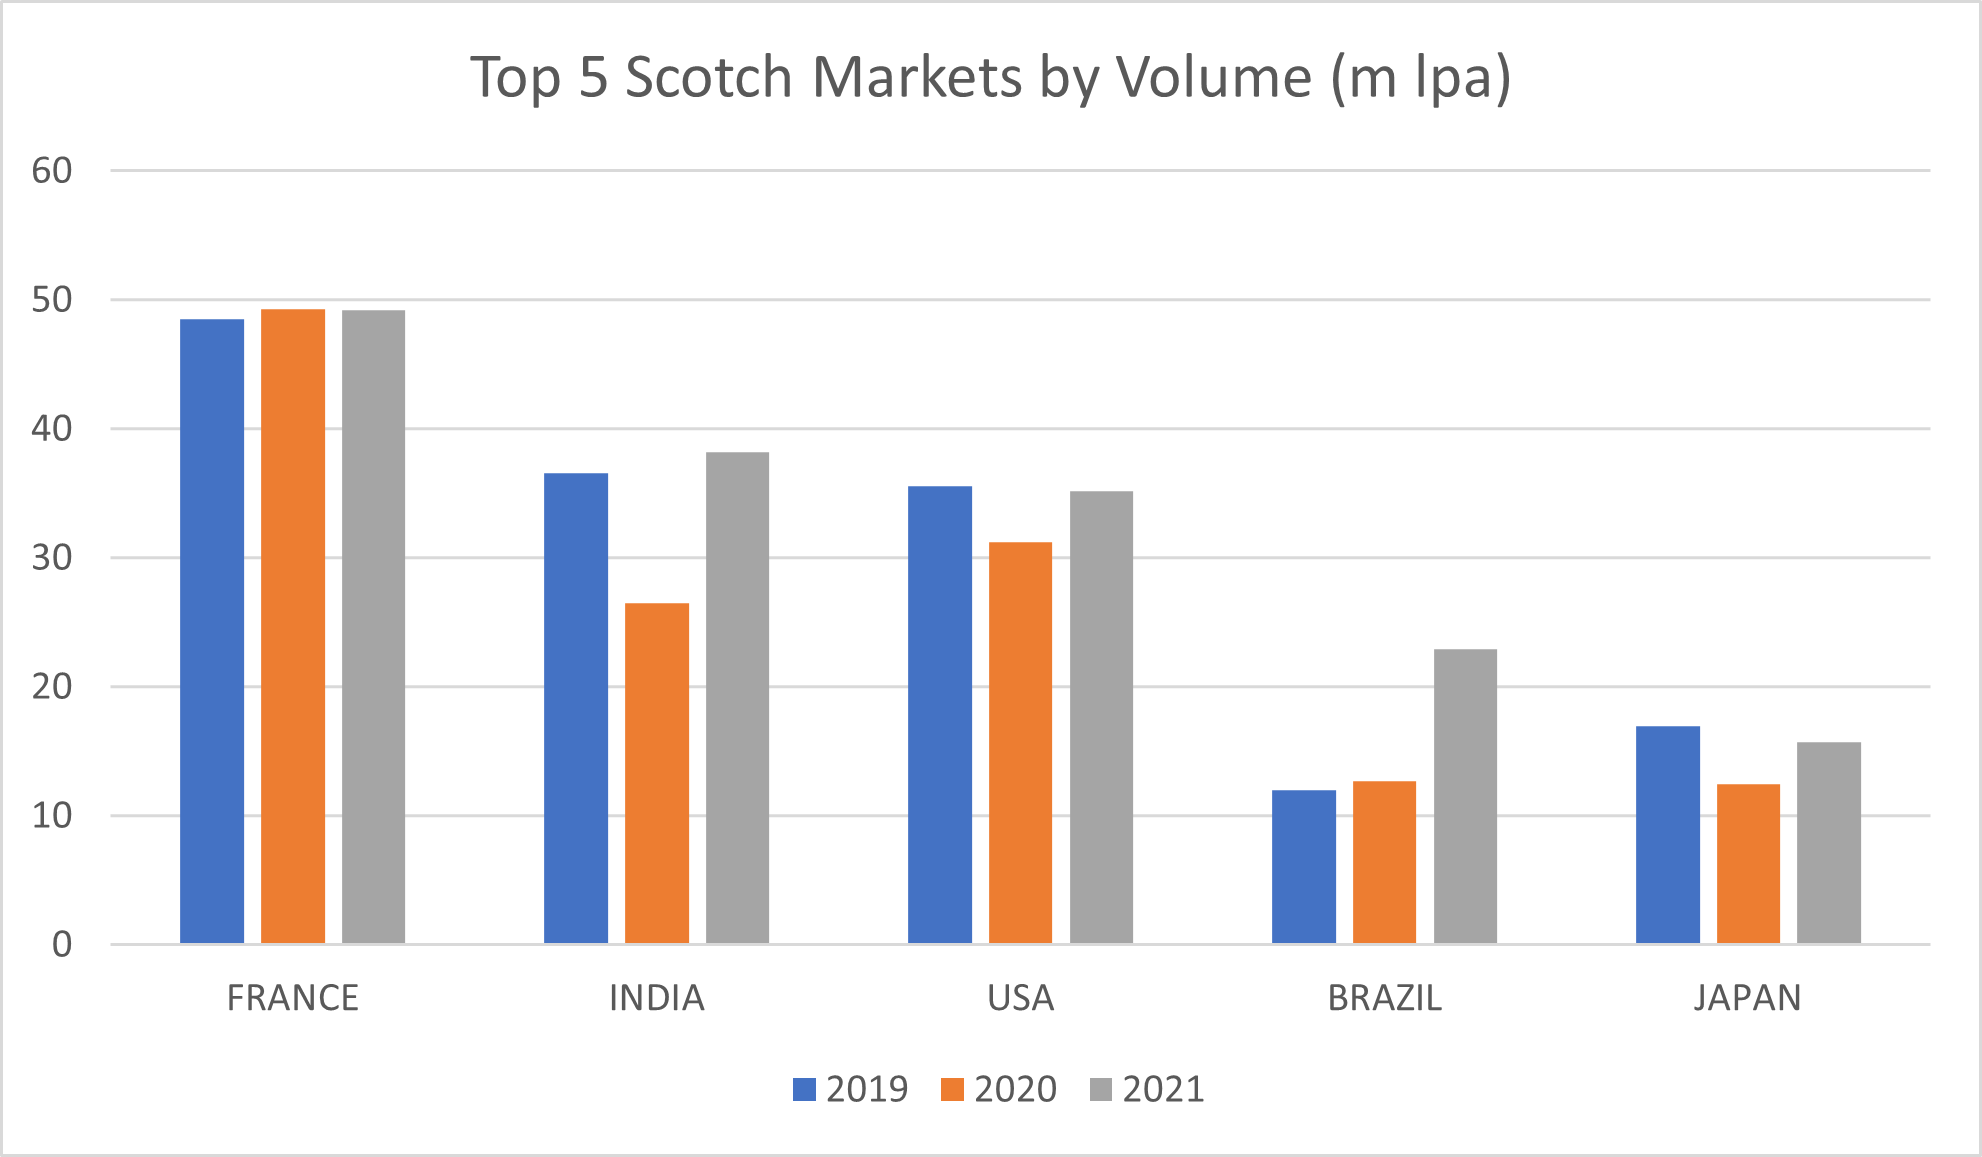 France has led the way in volumes of Scotch consumed, but India and Brazil are catching fast